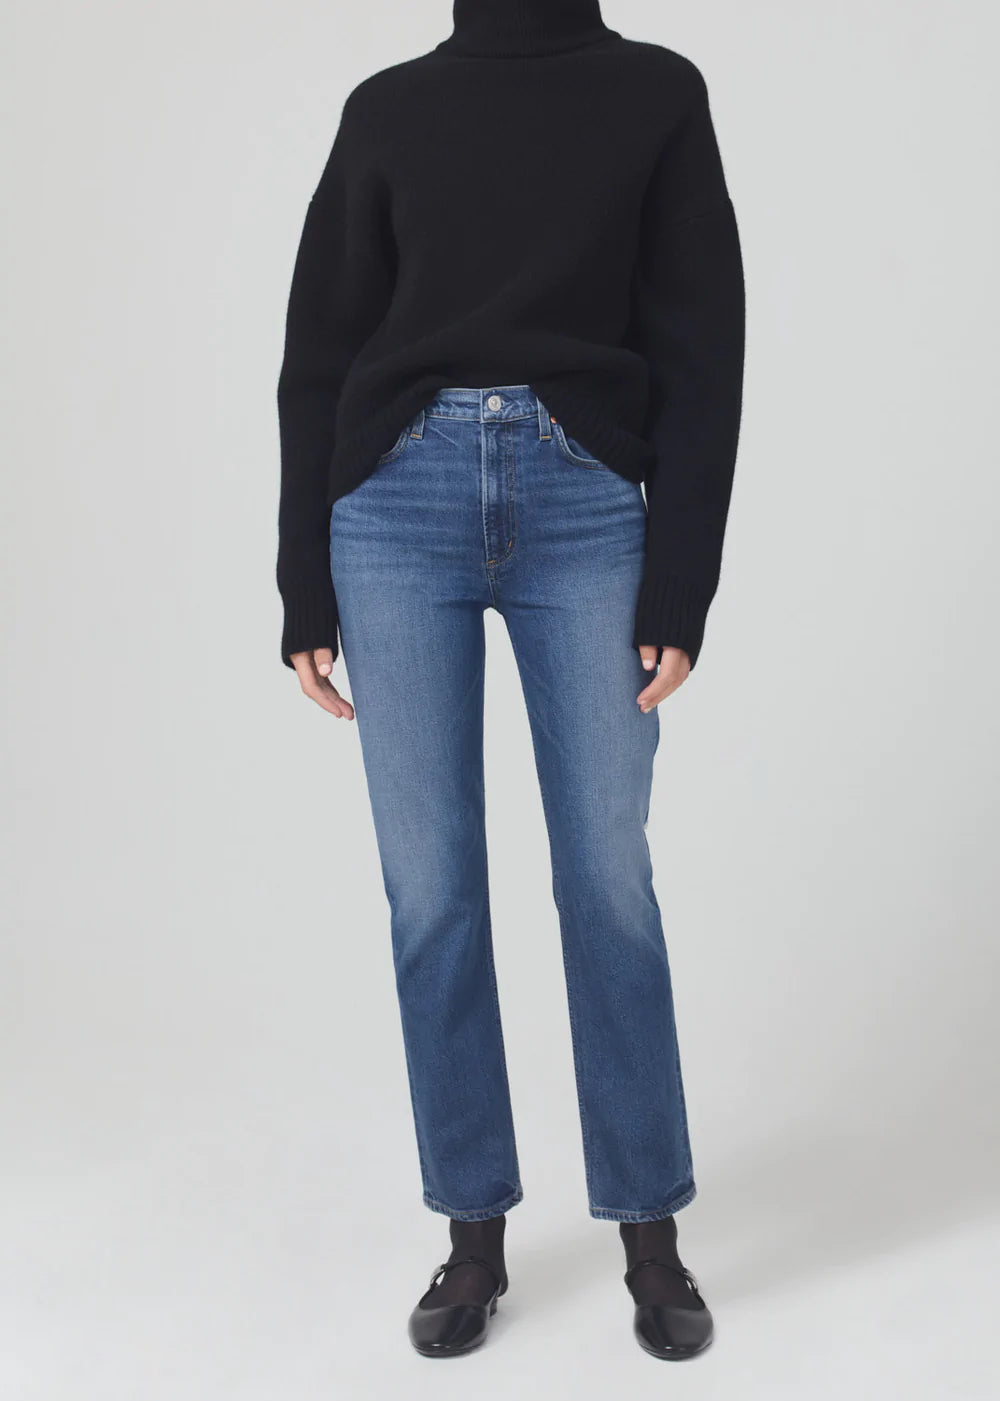 JEANS DAPHNE HIGH RISE STOVEPIPE